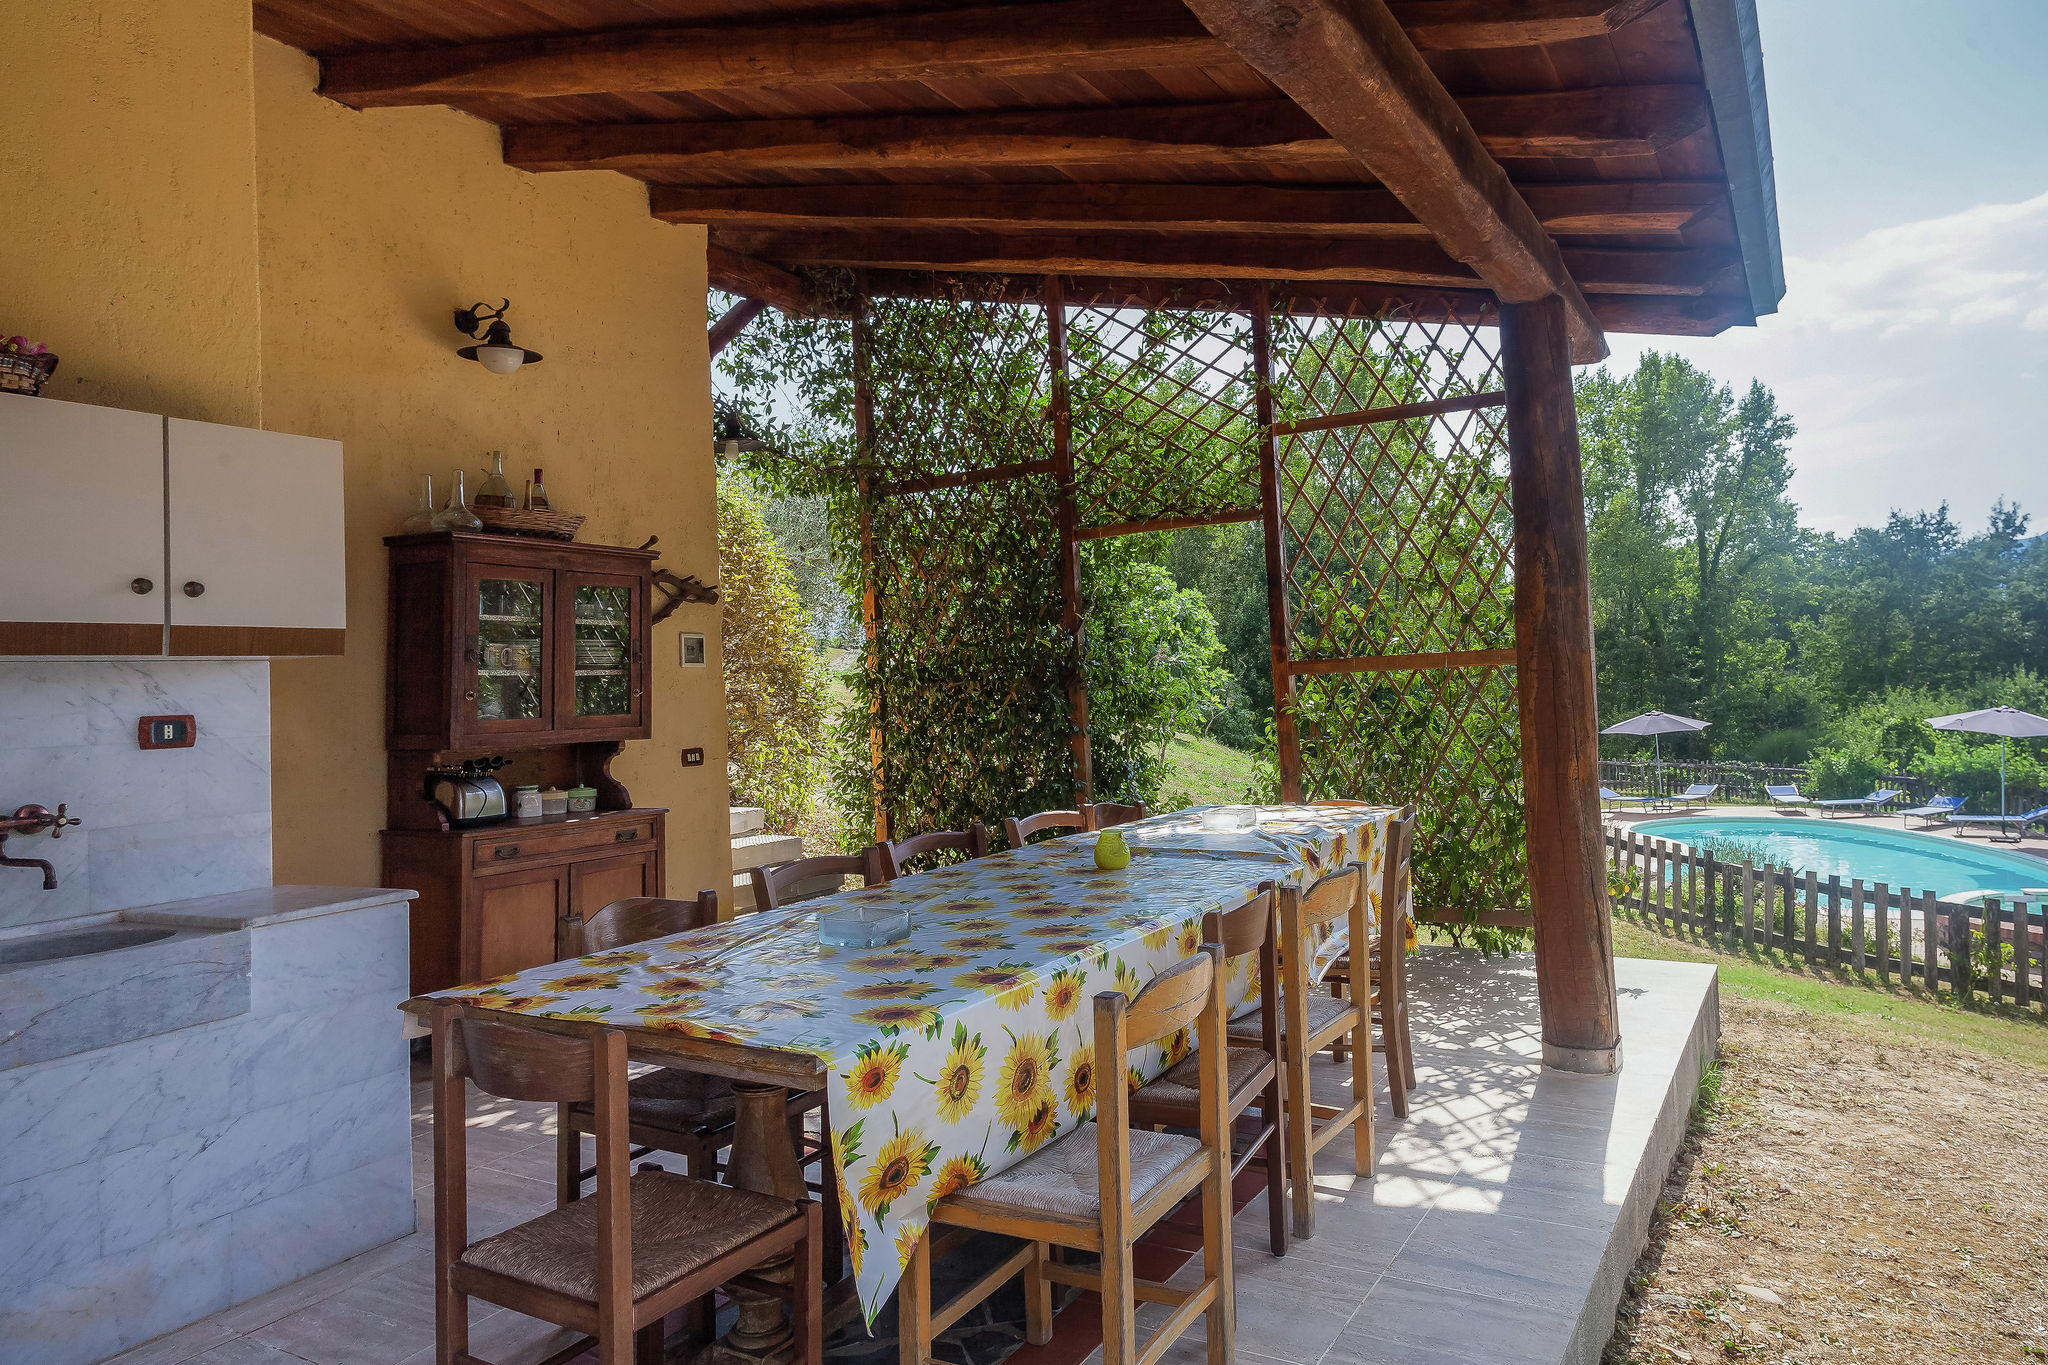 Lovely Farmhouse in Aulla with Swimming Pool